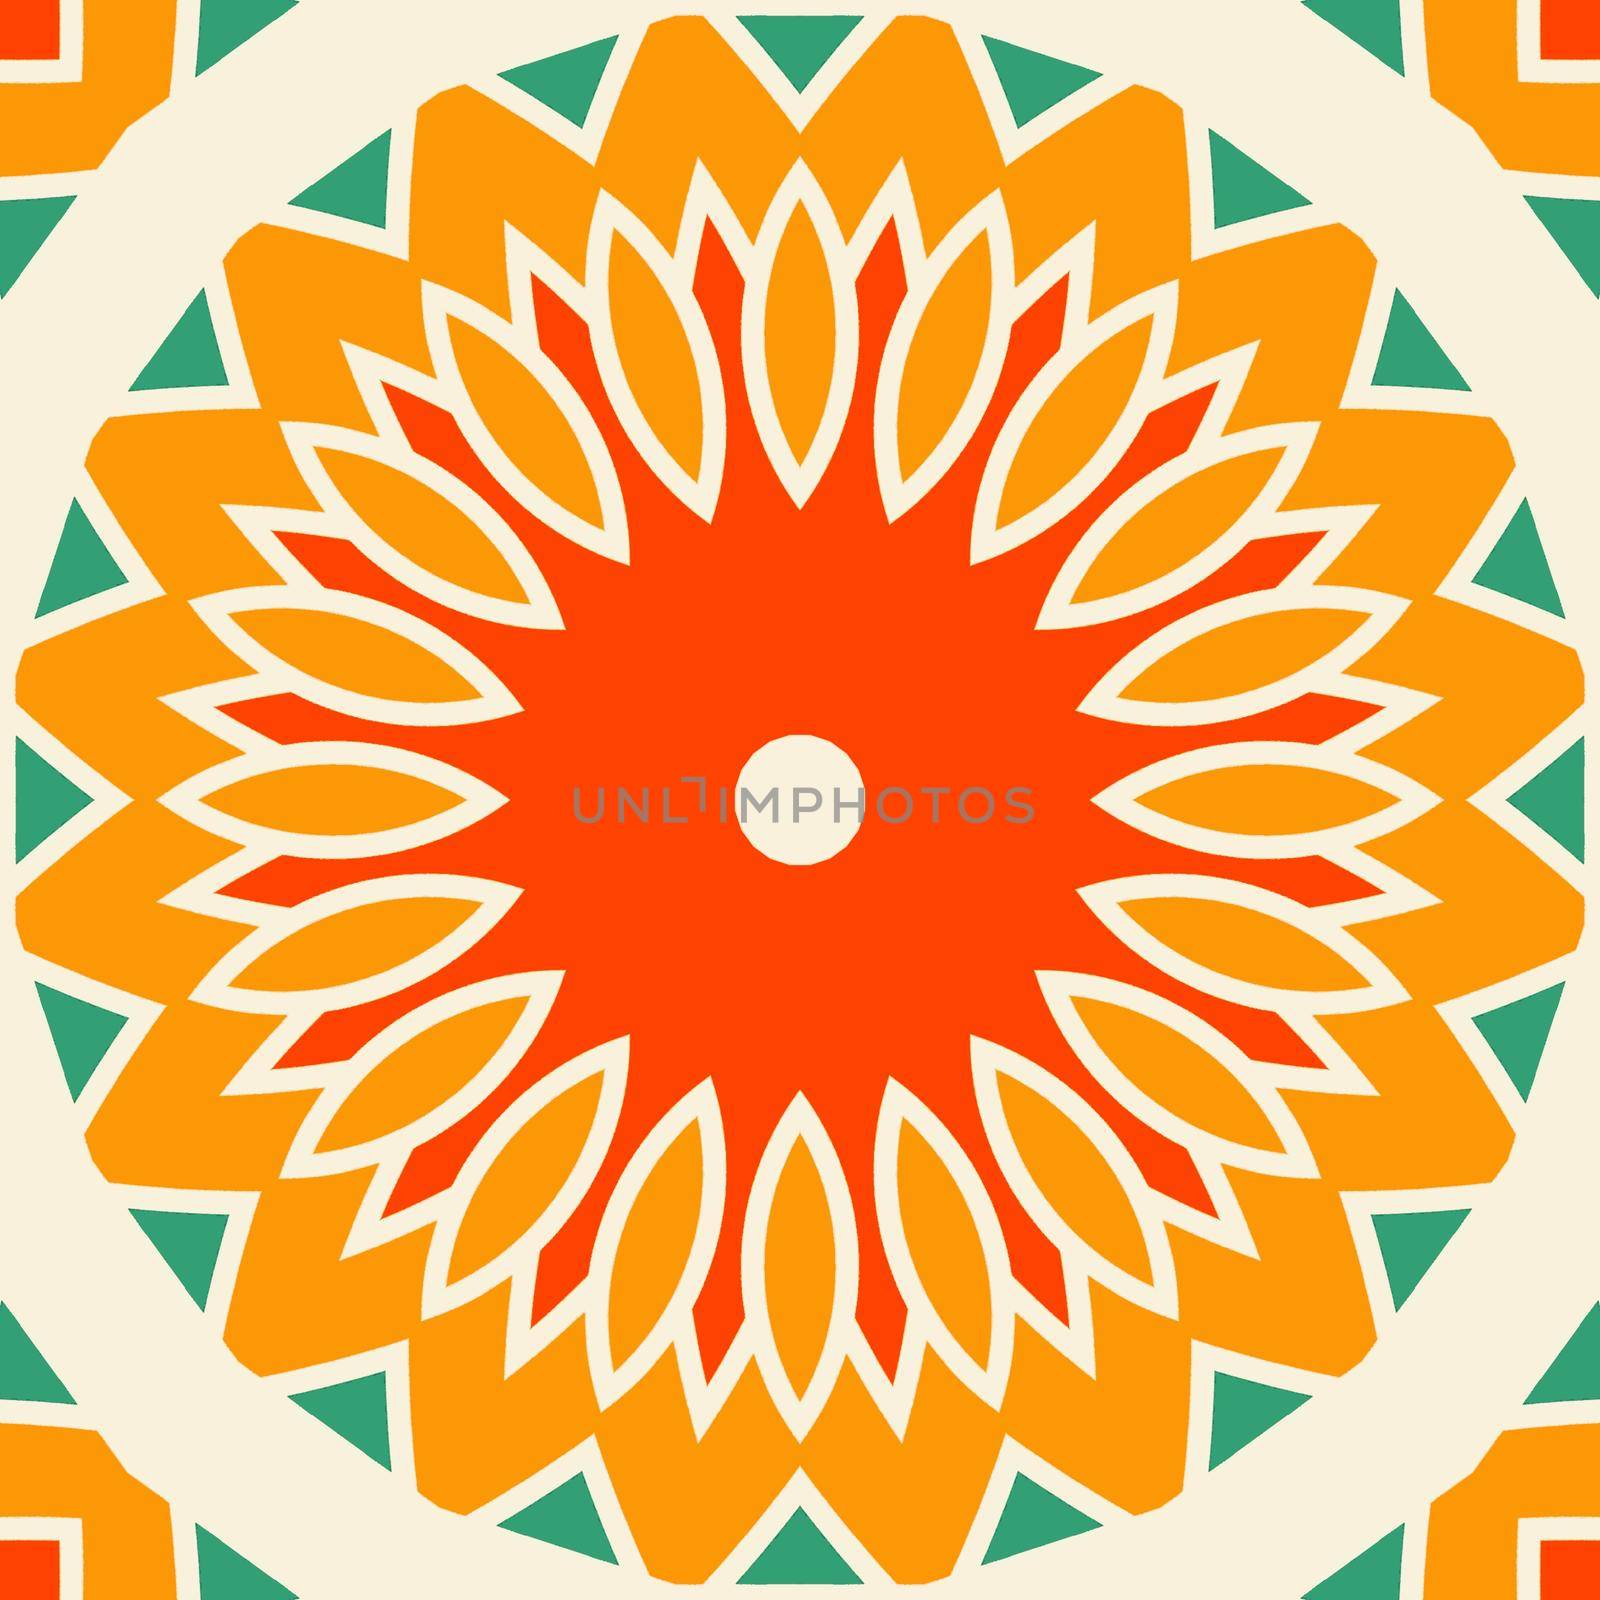 Beautiful shades of orange color symmetrical patterns illustration designs. Concept of home decor and interior designing by tabishere